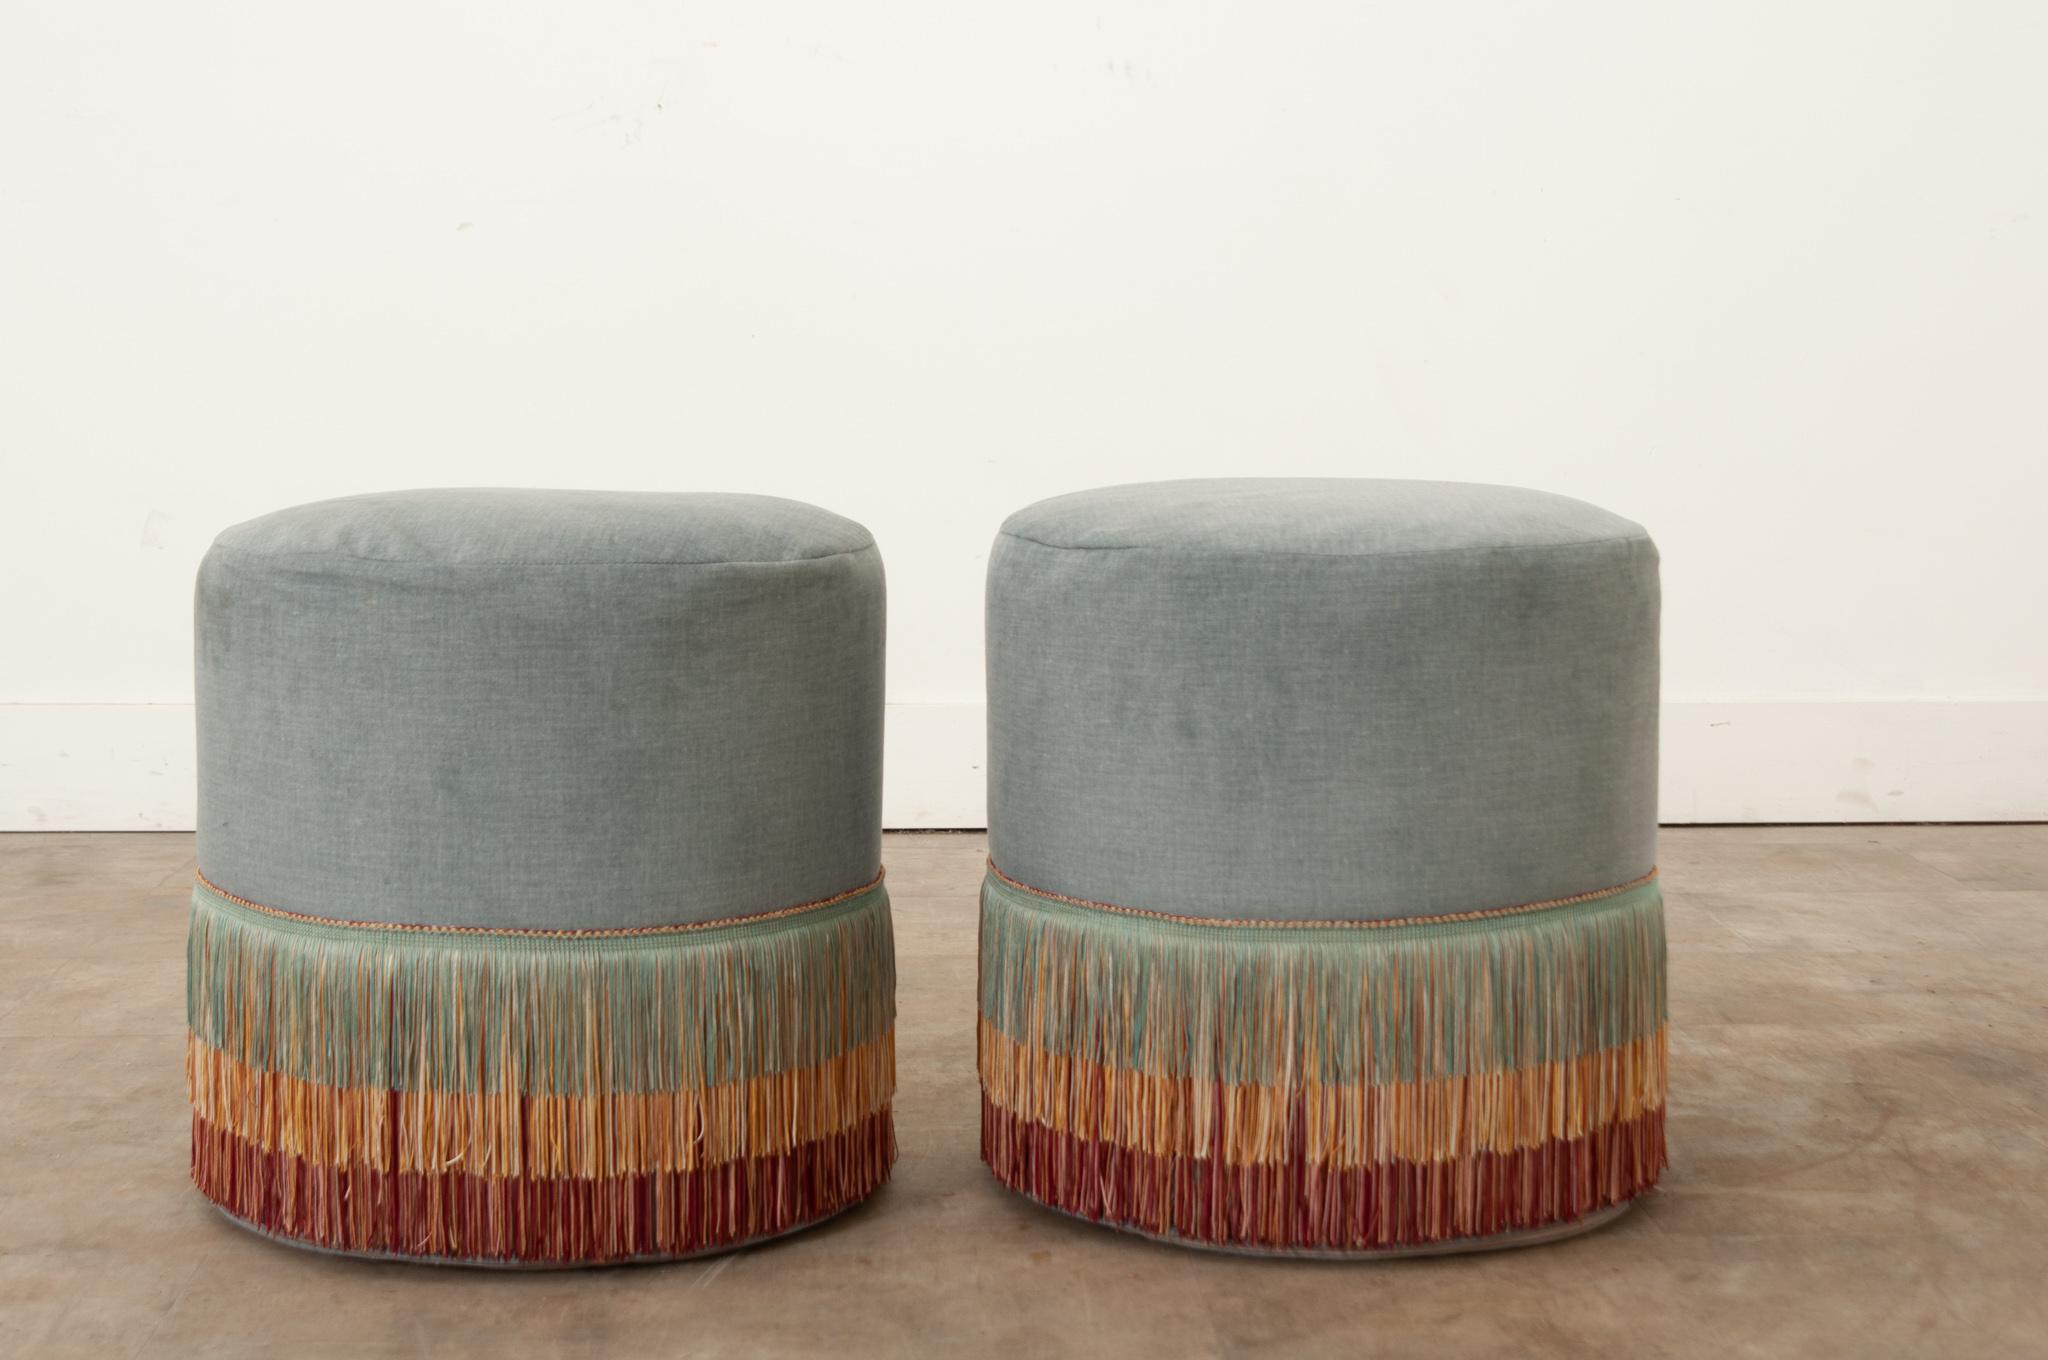 A pair of recently made custom ottomans made with a soft light blue velvet and tiered fringe. Comfortable and stylish, this pair of ottomans are playful and functional. Be sure to view the detailed images to see the current condition.